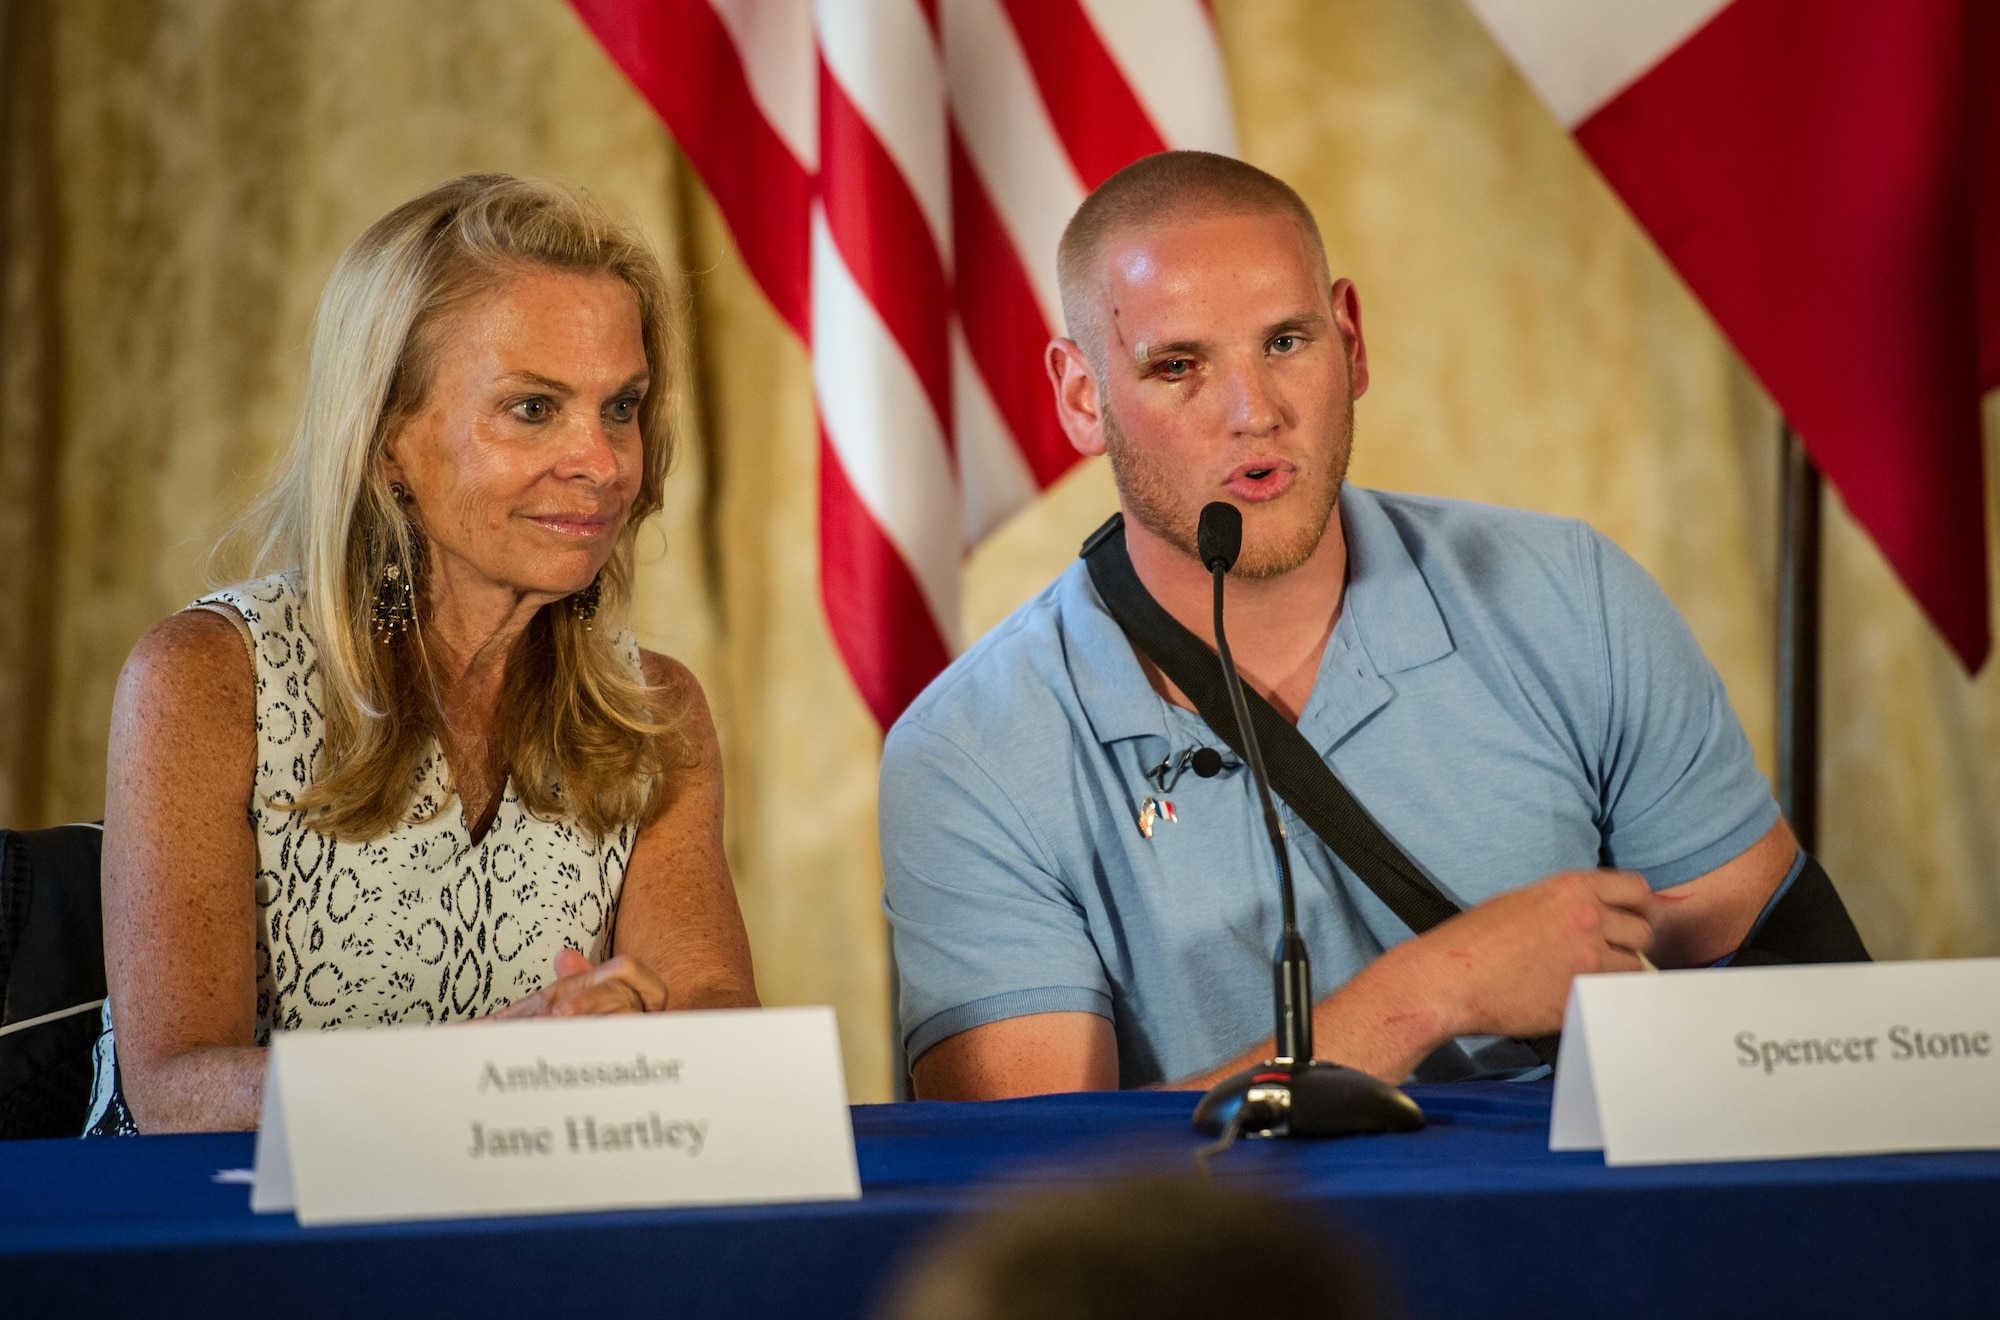 Airman 1st Class Spencer Stone along with Jane D. Hartly,  the U.S. ambassador to France, and his two friends speak at a press conference in Paris Aug. 23, 2015, following a foiled attack on a French train. Stone was on vacation with his childhood friends, Aleksander Skarlatos and Anthony Sadler, when an armed gunman entered their train carrying an assault rifle, a handgun and a box cutter. The three friends, with the help of a British passenger, subdued the gunman after his rifle jammed. (U.S. Air Force photo/Tech. Sgt. Ryan Crane)